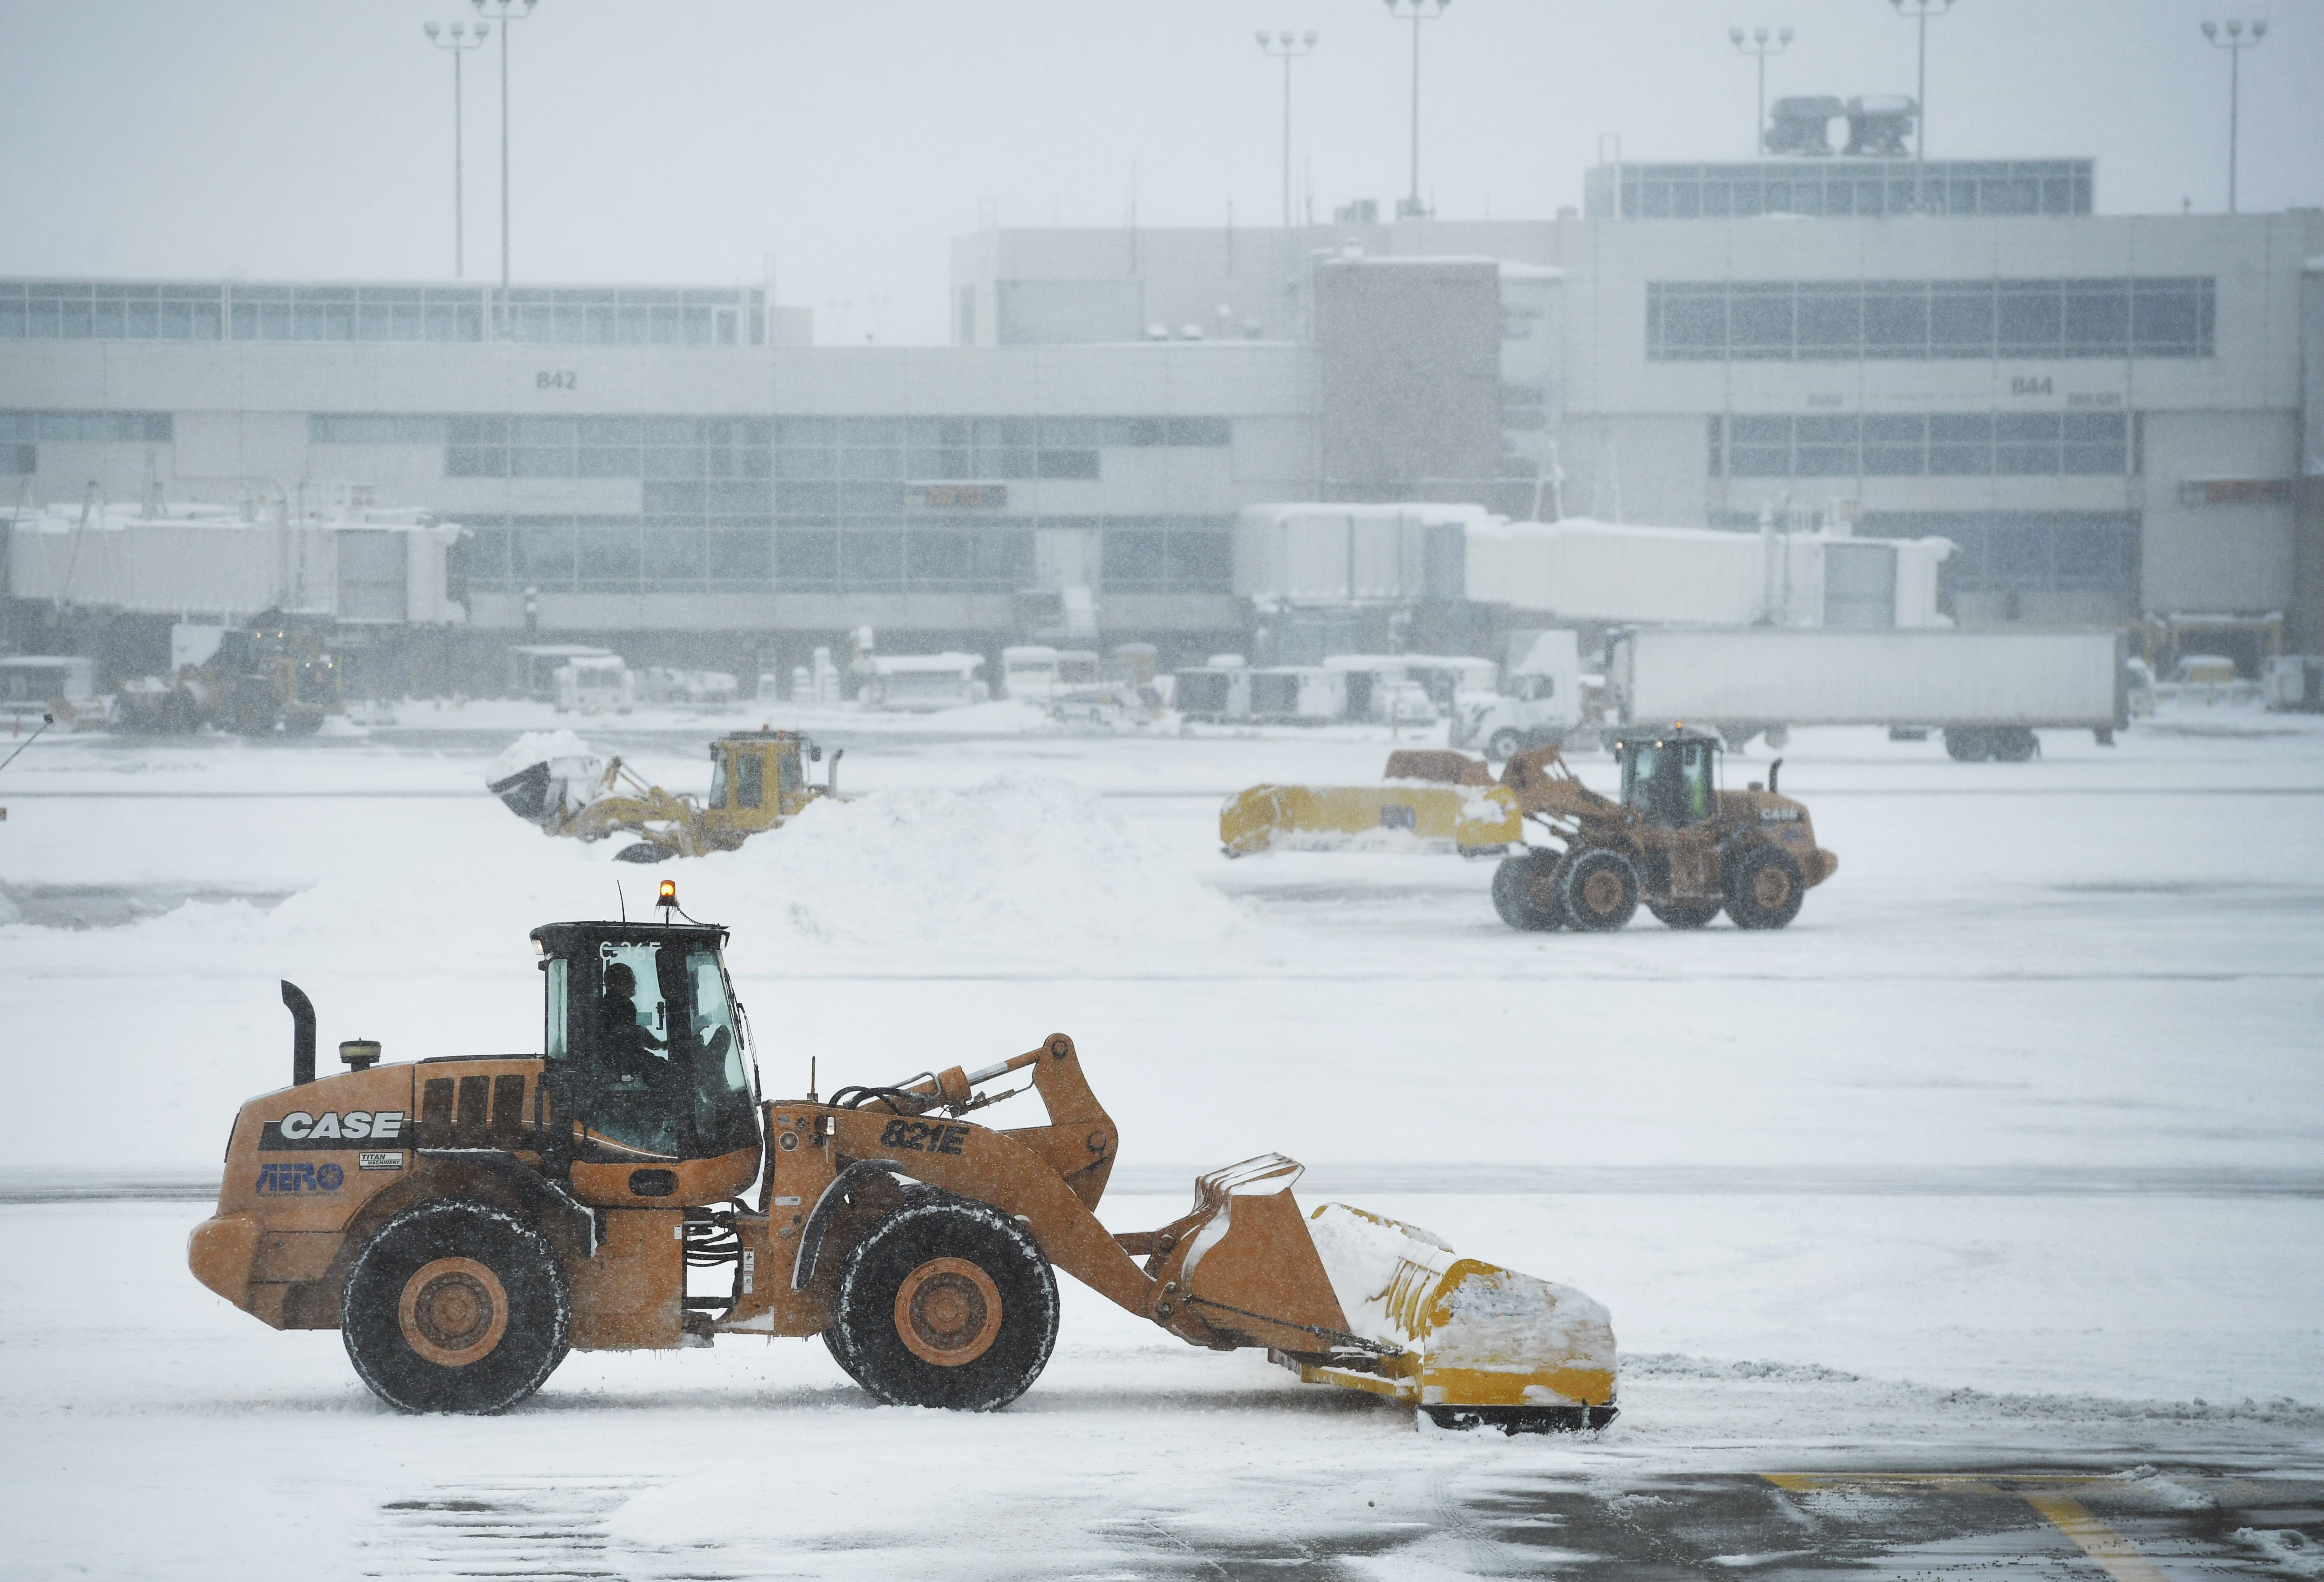 Crews work to clear heavy snow in-between concourses at Denver International Airport 